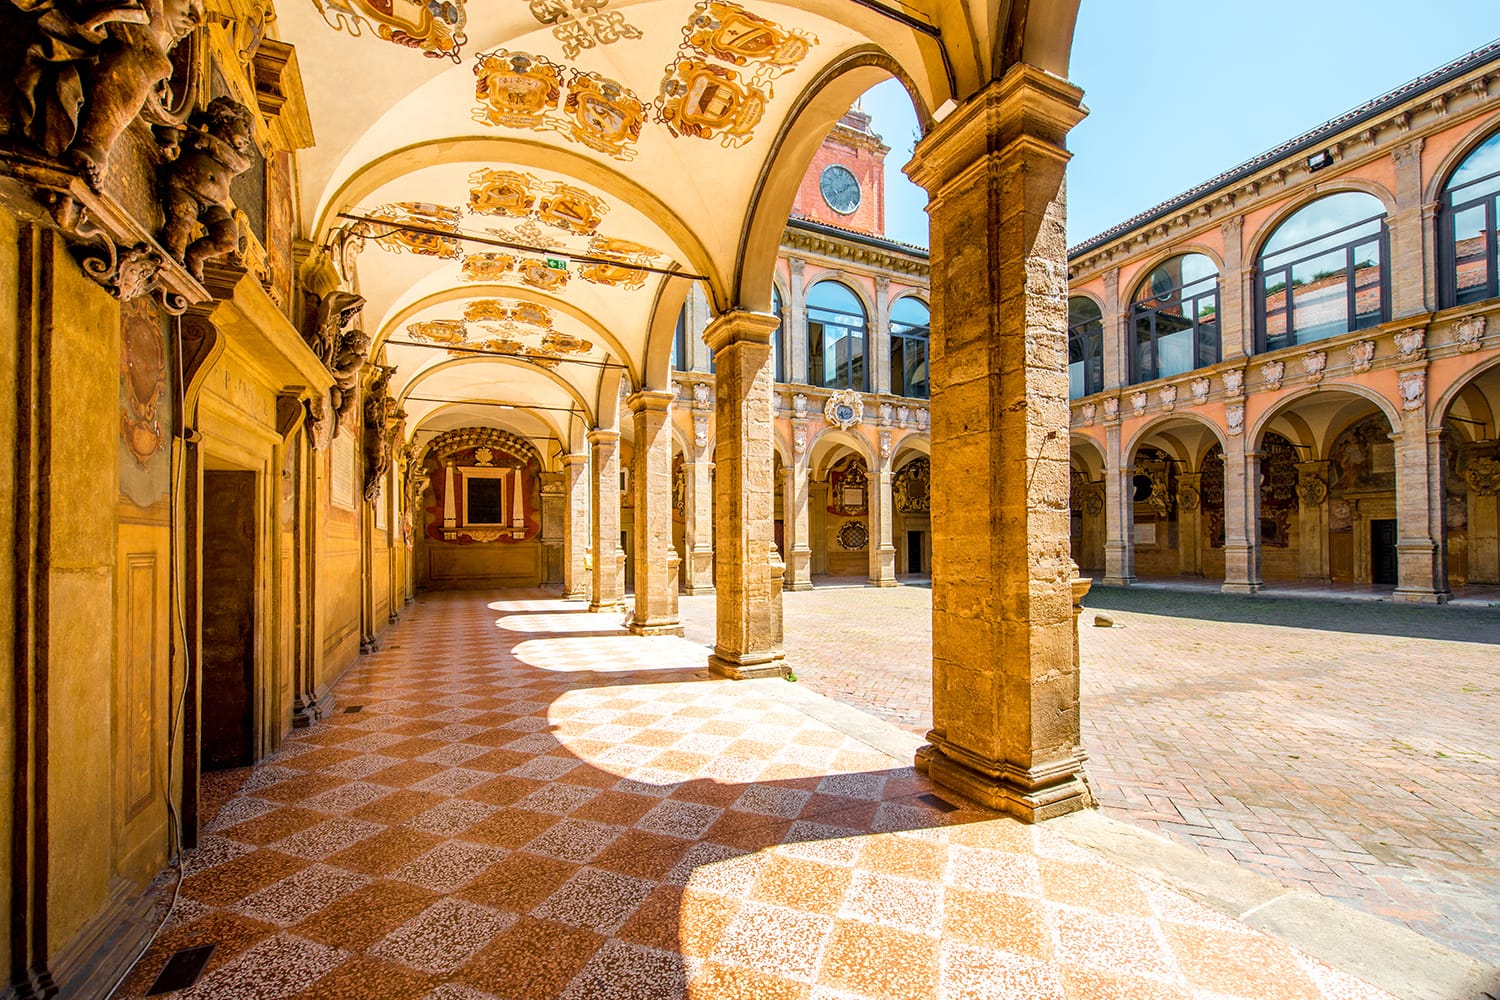 Inner yard of Archiginnasio of Bologna that houses now Municipal Library and the famous Anatomical Theatre. It is one of the most important building in Bologna, Italy.